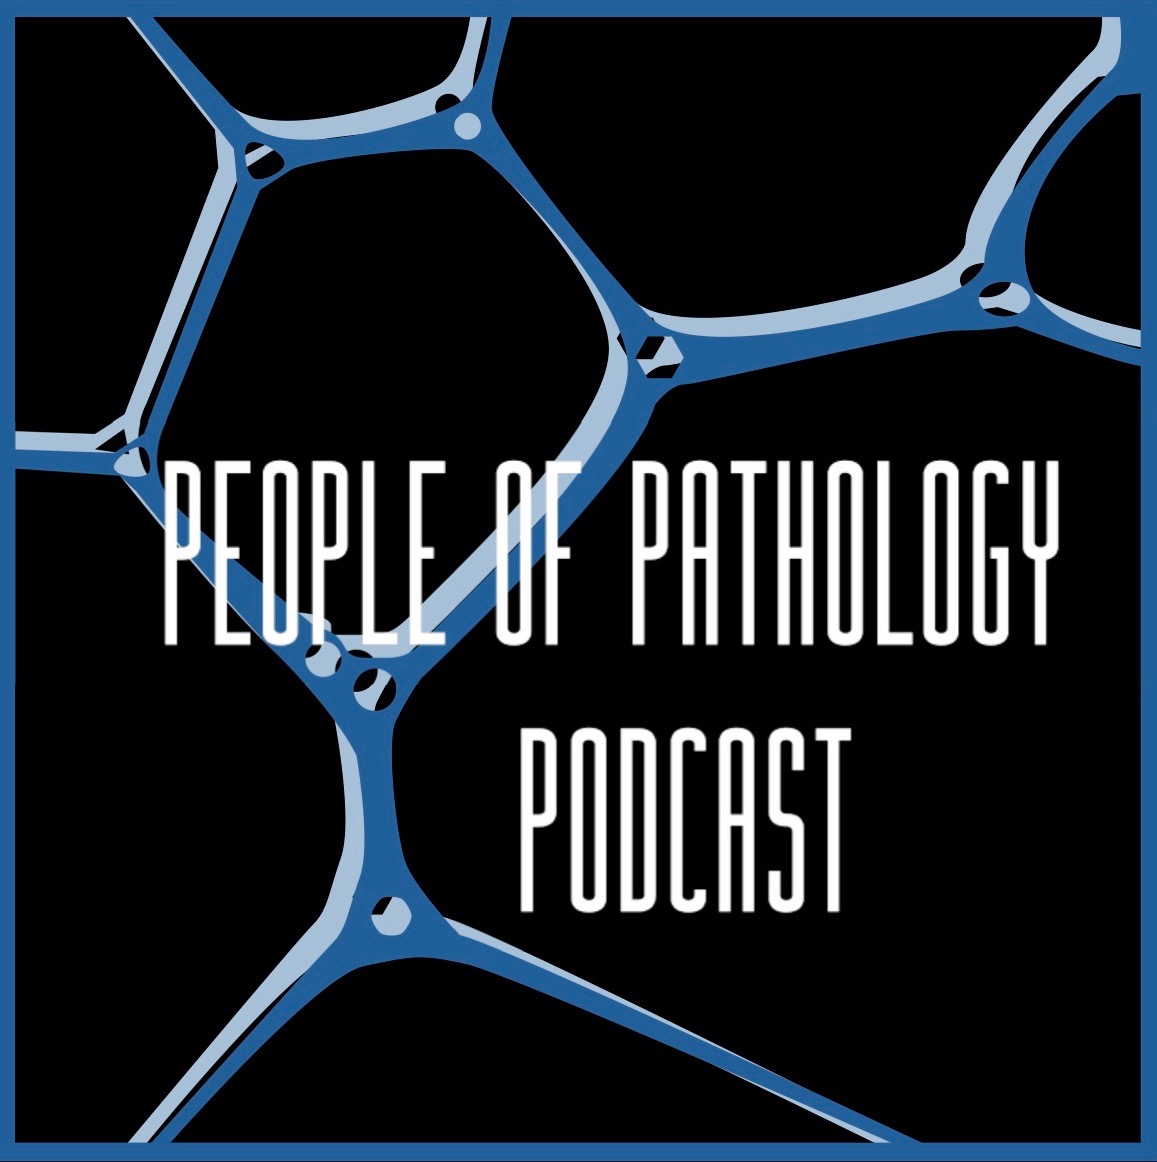 Episode 32: Dr Neil Theise – Liver Pathology, Interstitium, Complexity Theory, and More